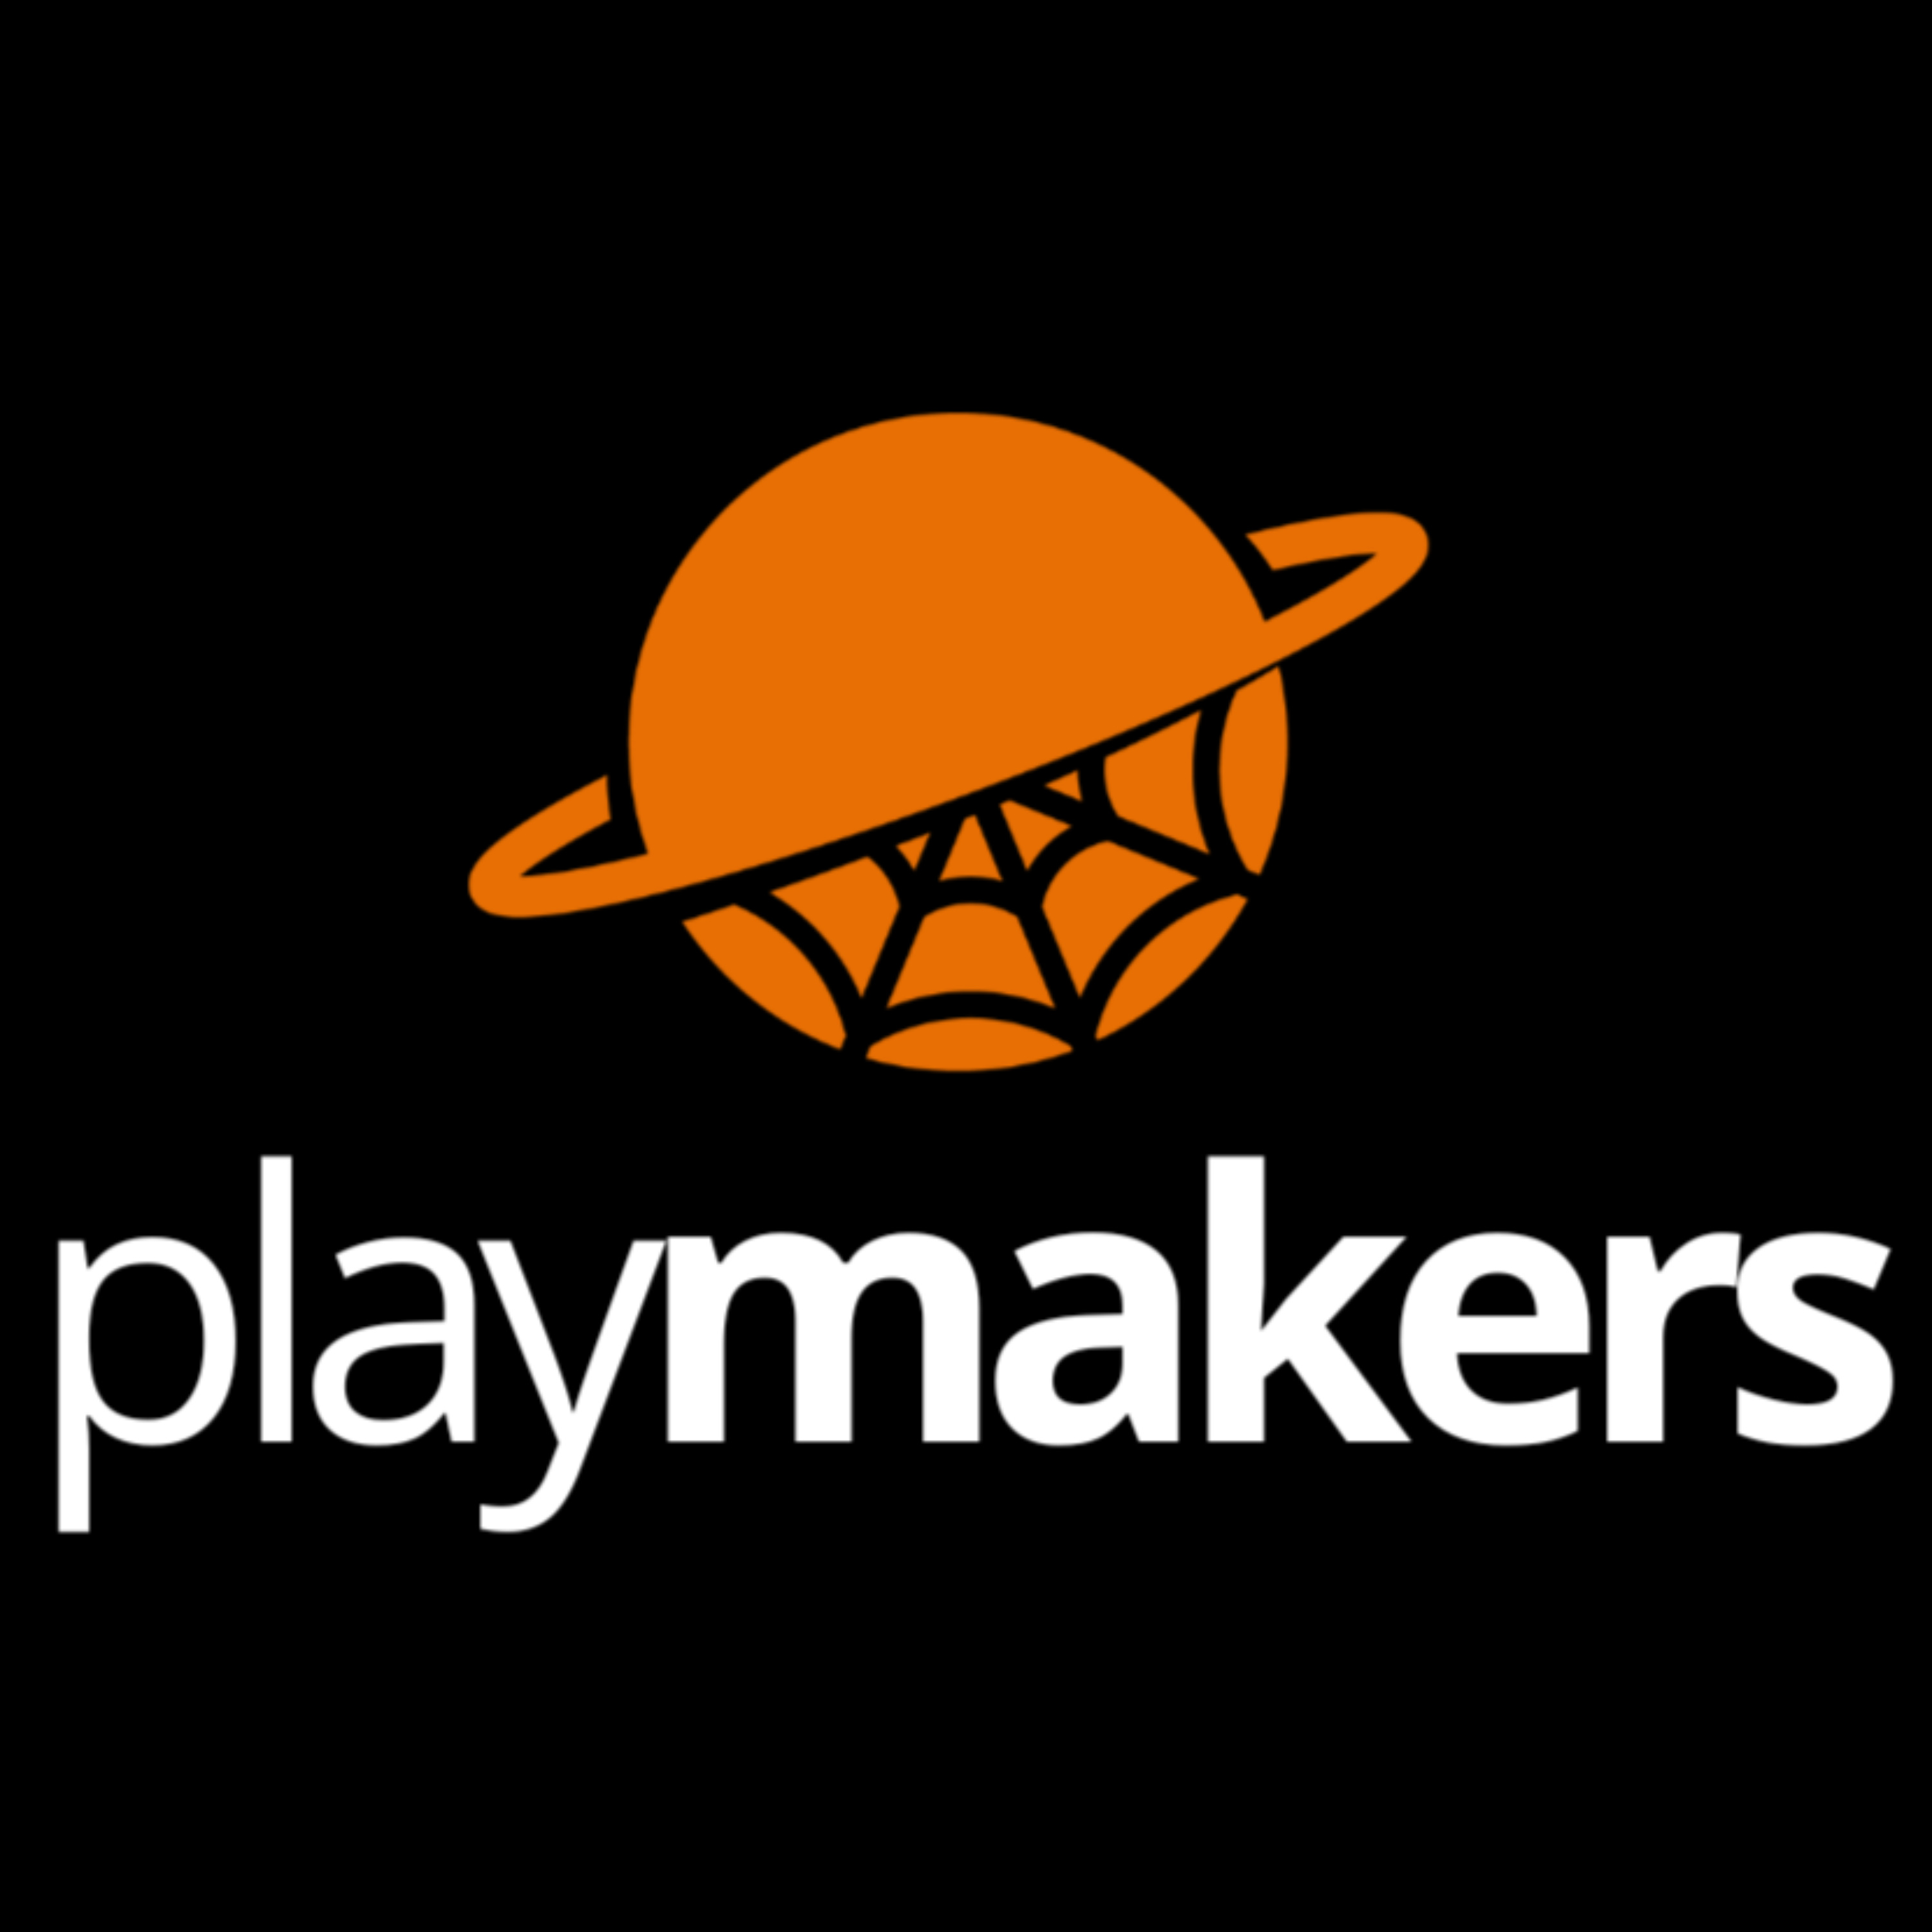 Playmakers by FNN 🌐